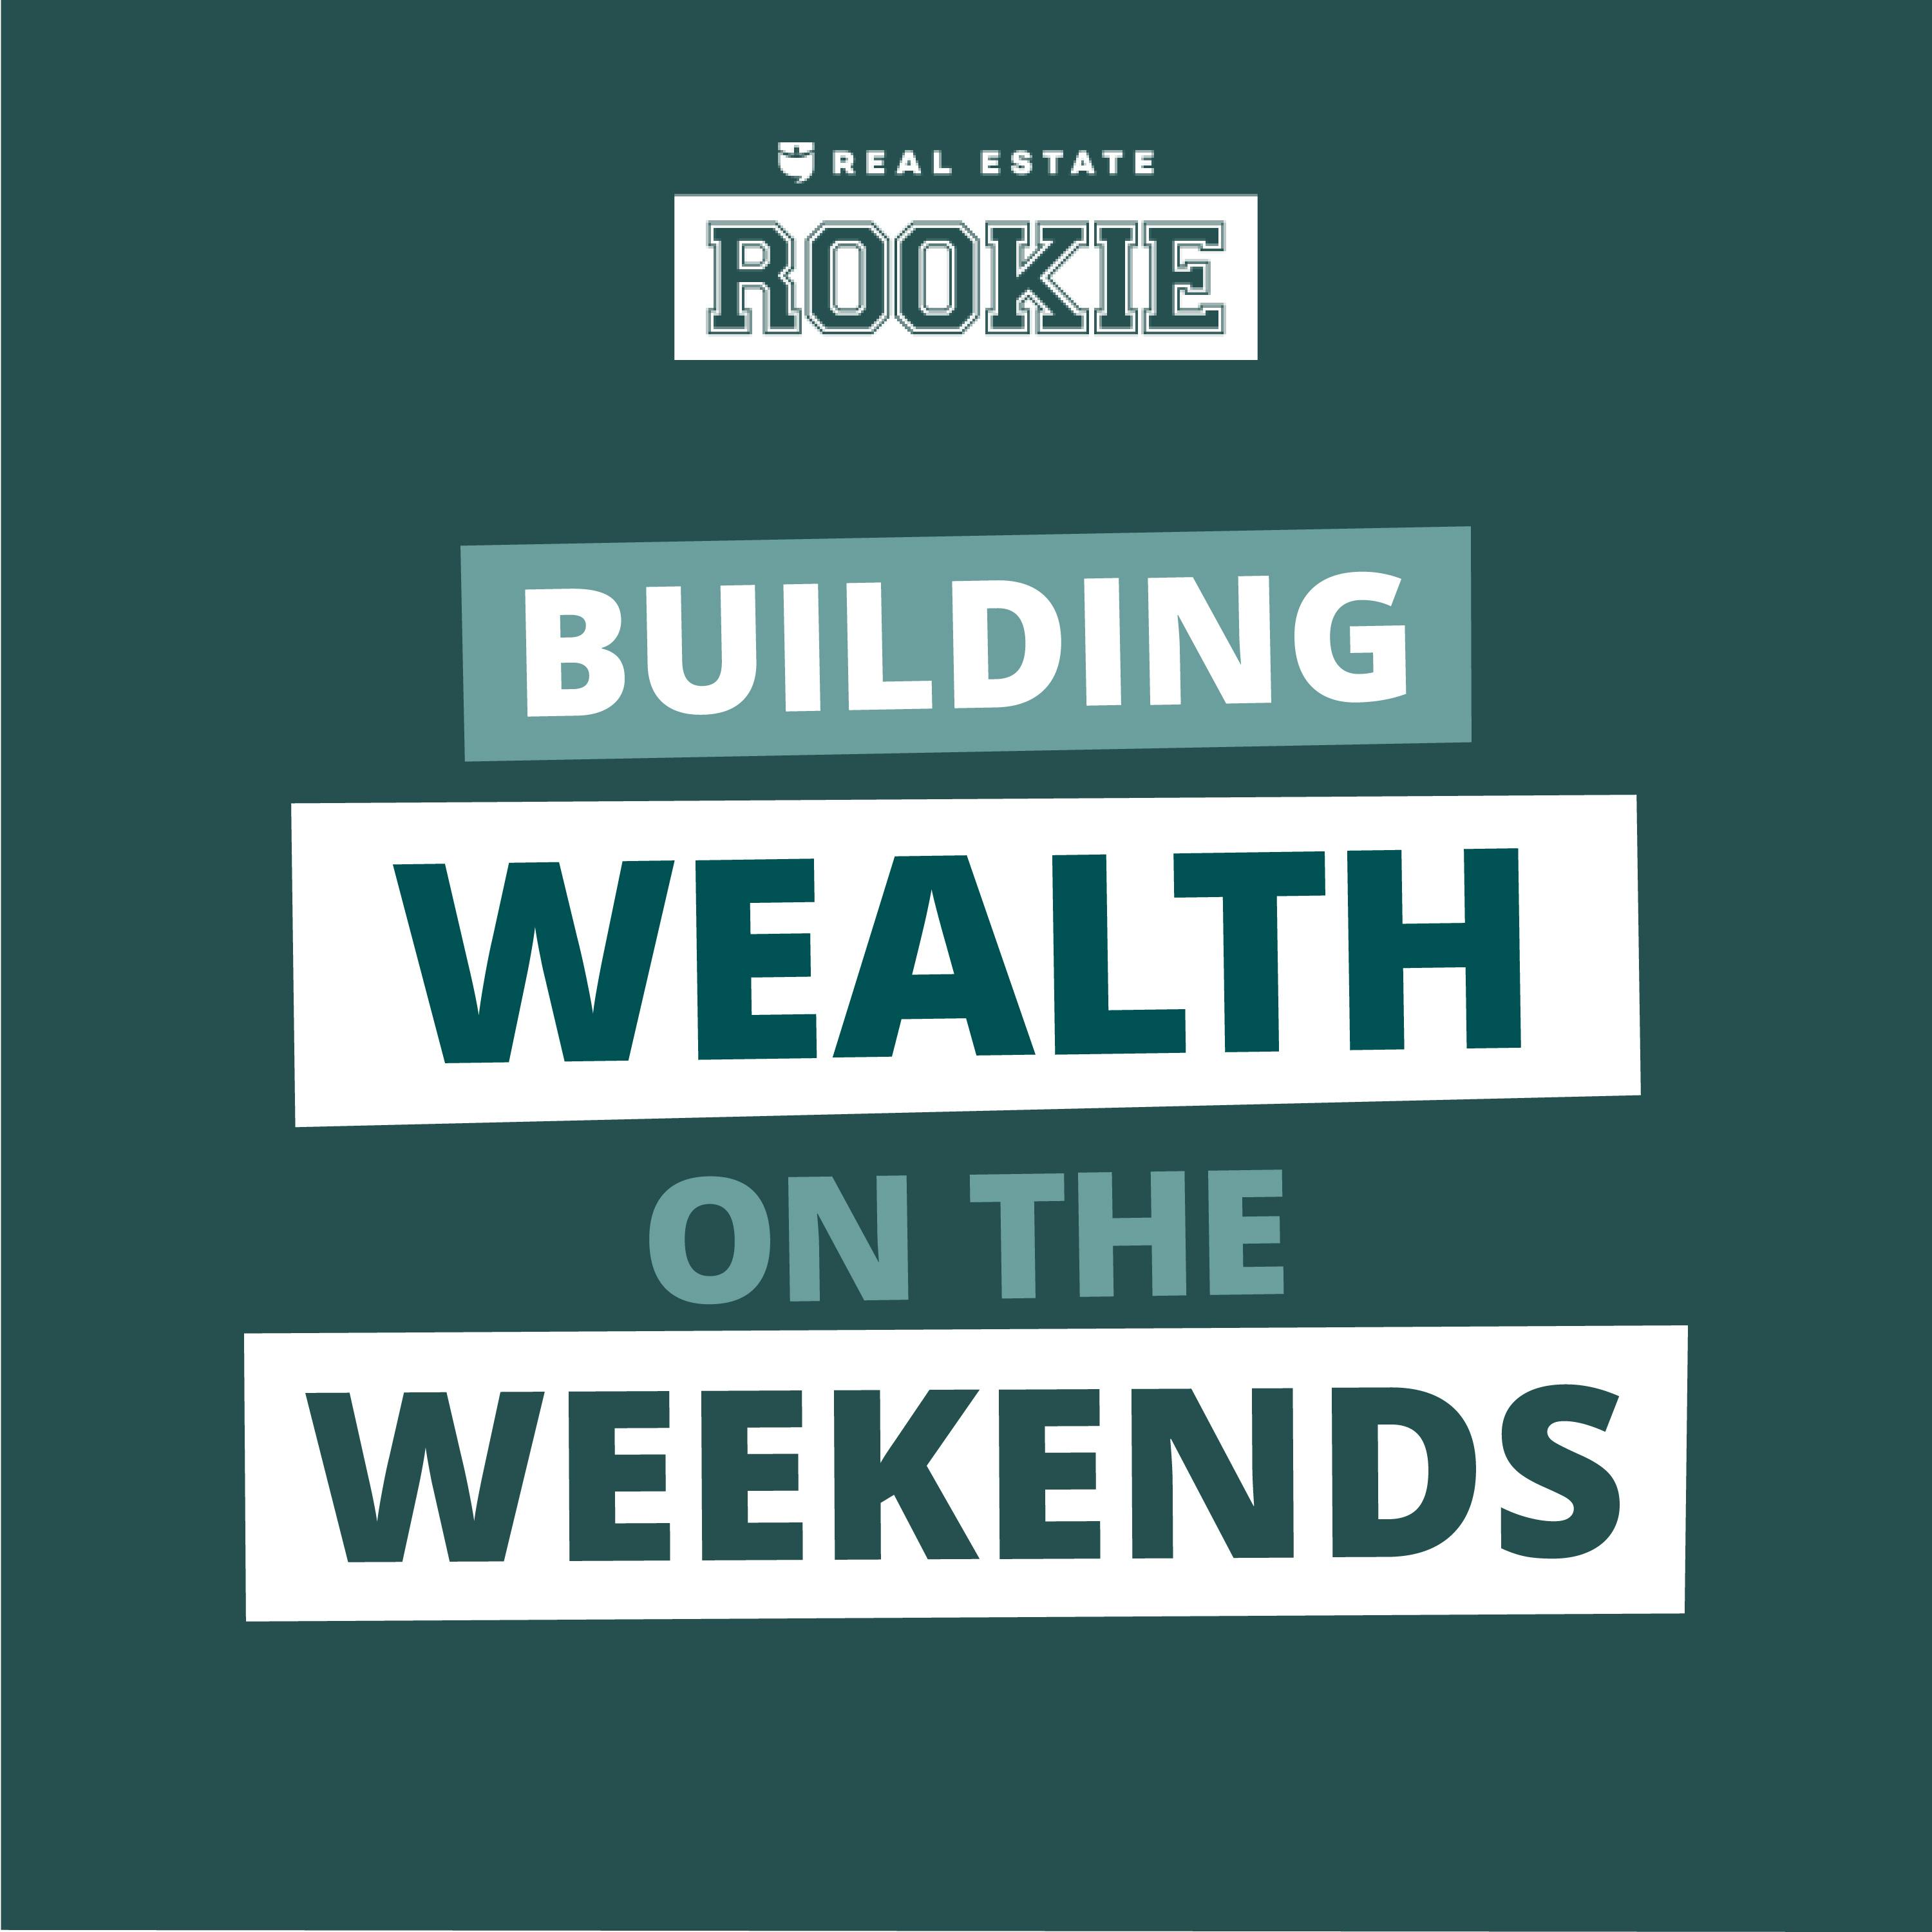 227: The Vice-Principal Who Built a 9-Unit Rental Portfolio on The Weekends w/Mackenzie Grate